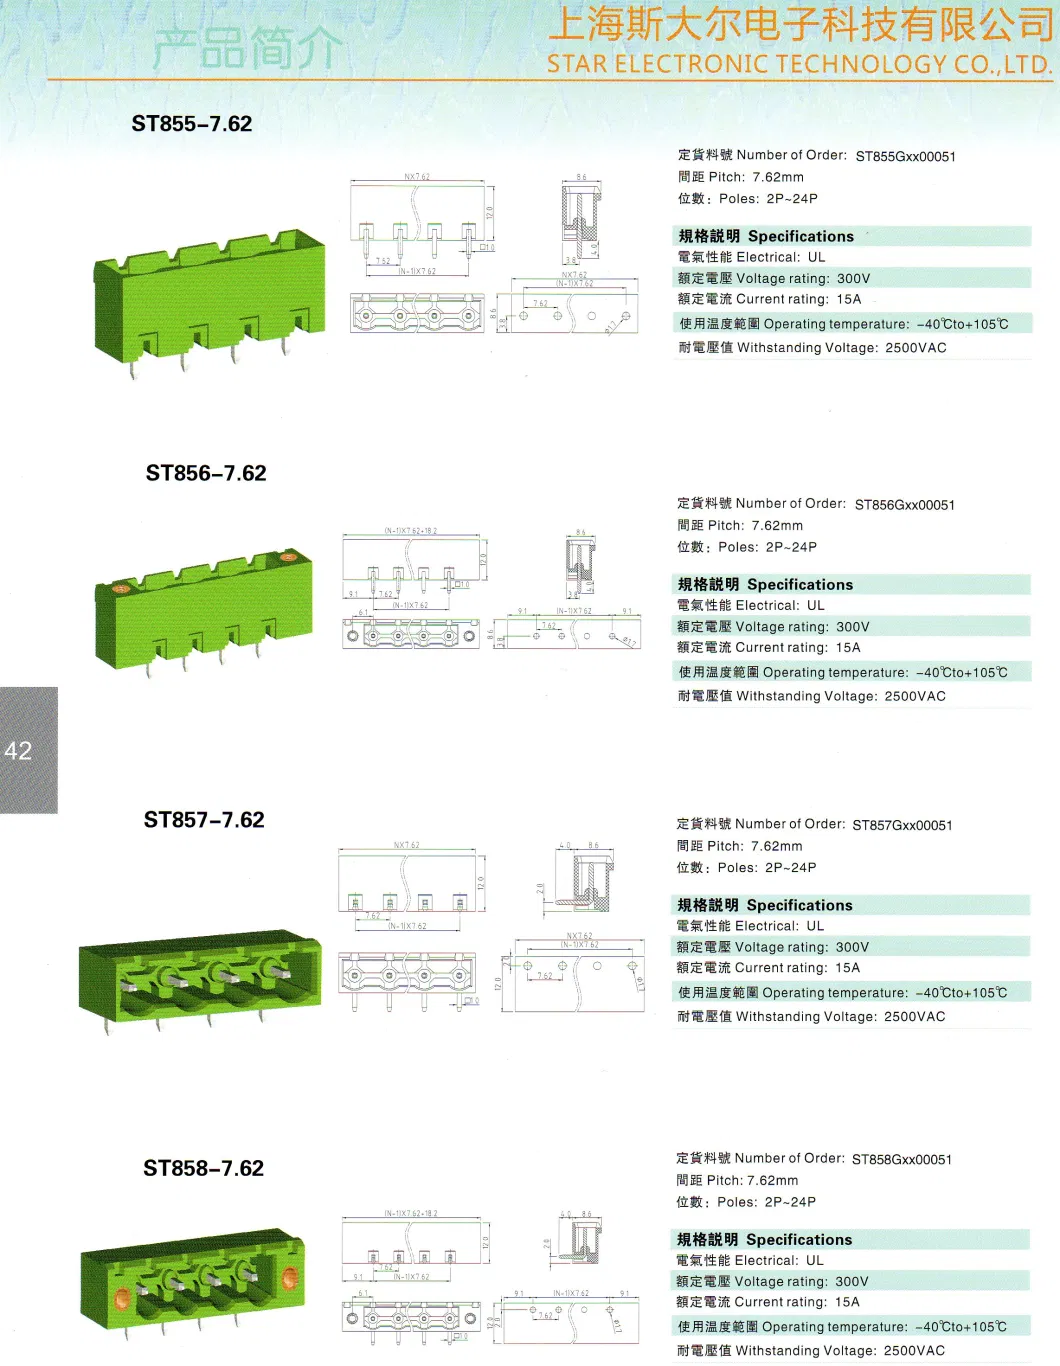 2/3/4/5/6/7/8/9/11/12pin Straight Needle Terminal Plug Type 300V 15A 5.08mm Pitch Connector PCB Screw Terminal Block